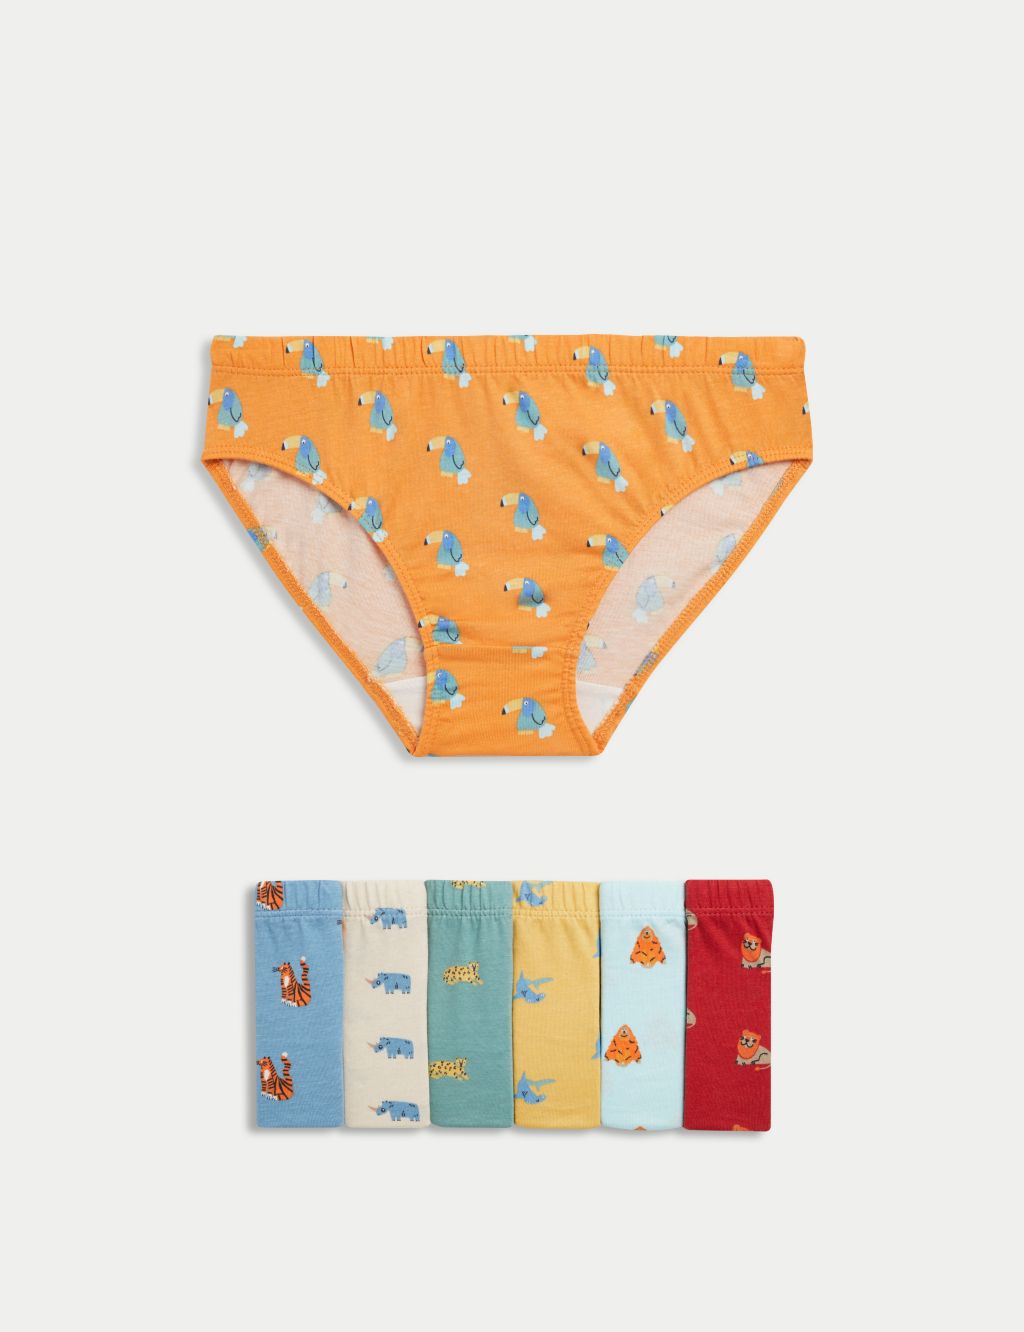 Animal and Vehicle Briefs 10 Pack, Kids